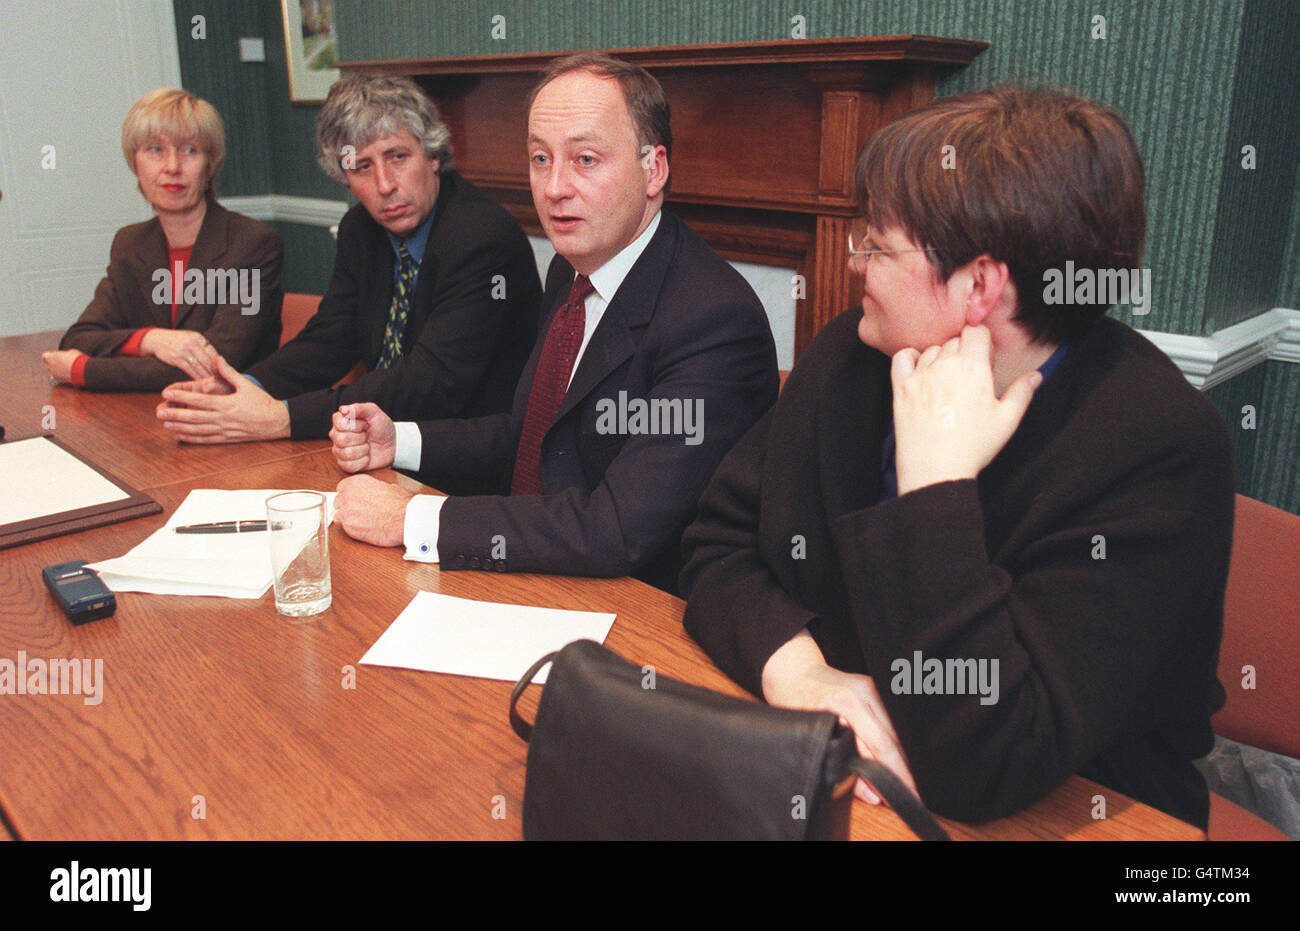 Shaun Woodward (2nd right), former Conservative MP for Witney, in Oxfordshire, who transferred his party allegiance to Labour, holds a news conference at Westminster. *From left: Phyllis Starkey MP, Vice chair of South-east MPs, Martin Salter MP, chair of South-east MPs, Mr Woodward, Fiona MacTaggart MP. Stock Photo